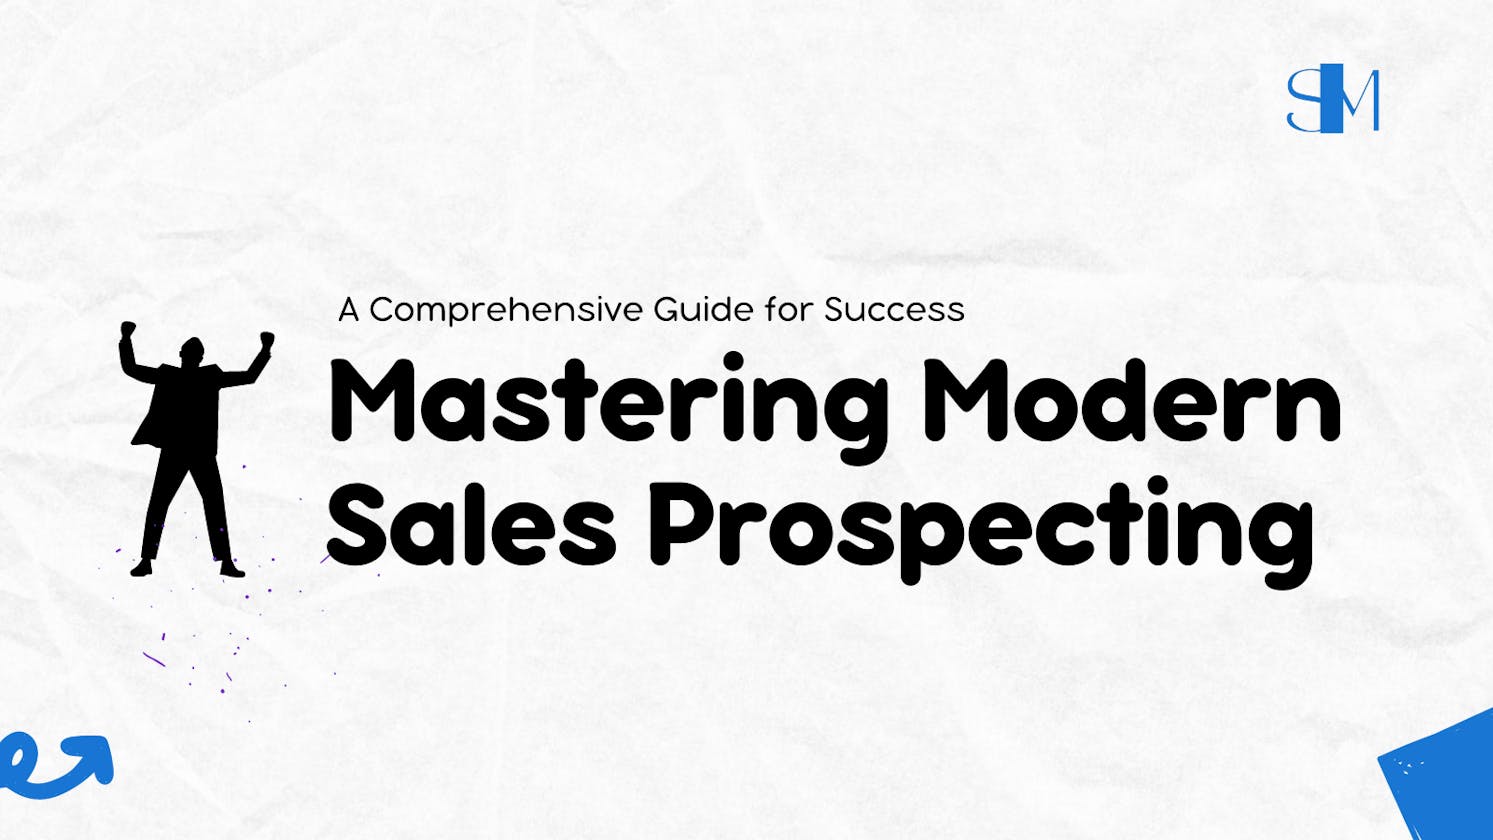 Mastering Modern Sales Prospecting: A Comprehensive Guide for Success